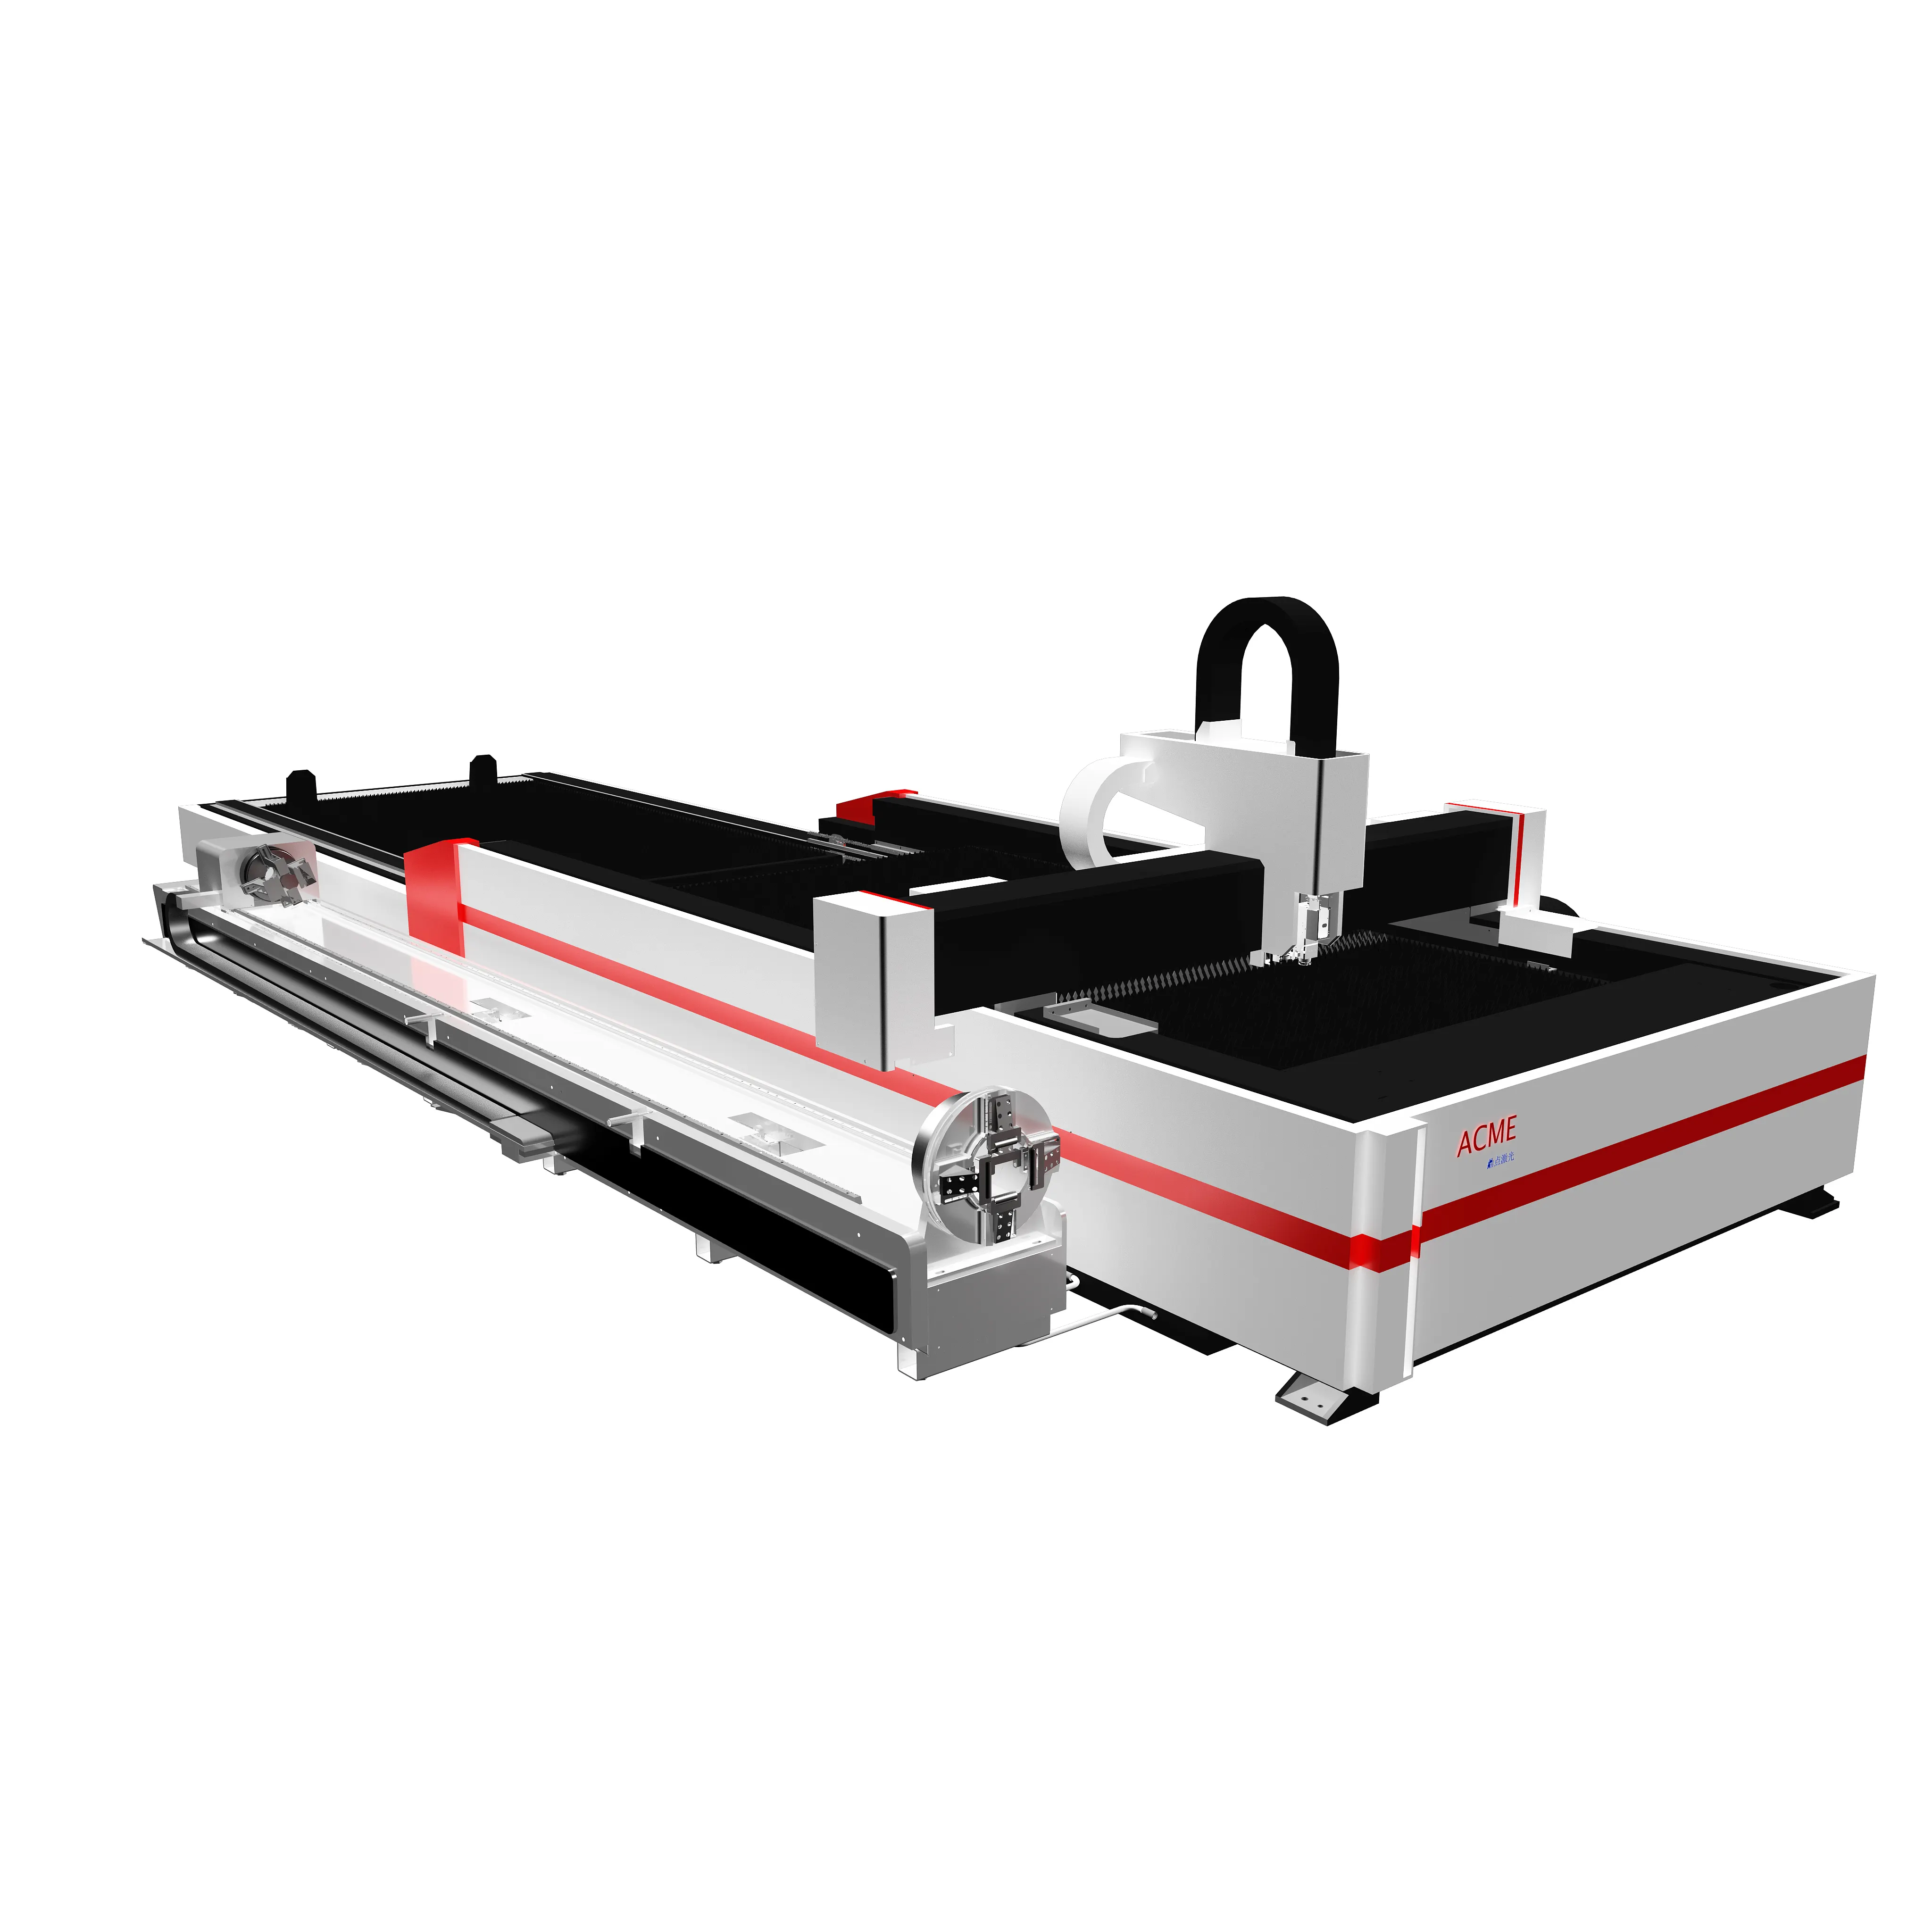 China Discount Plate And Pipes Fiber Laser Cutting Machine prices